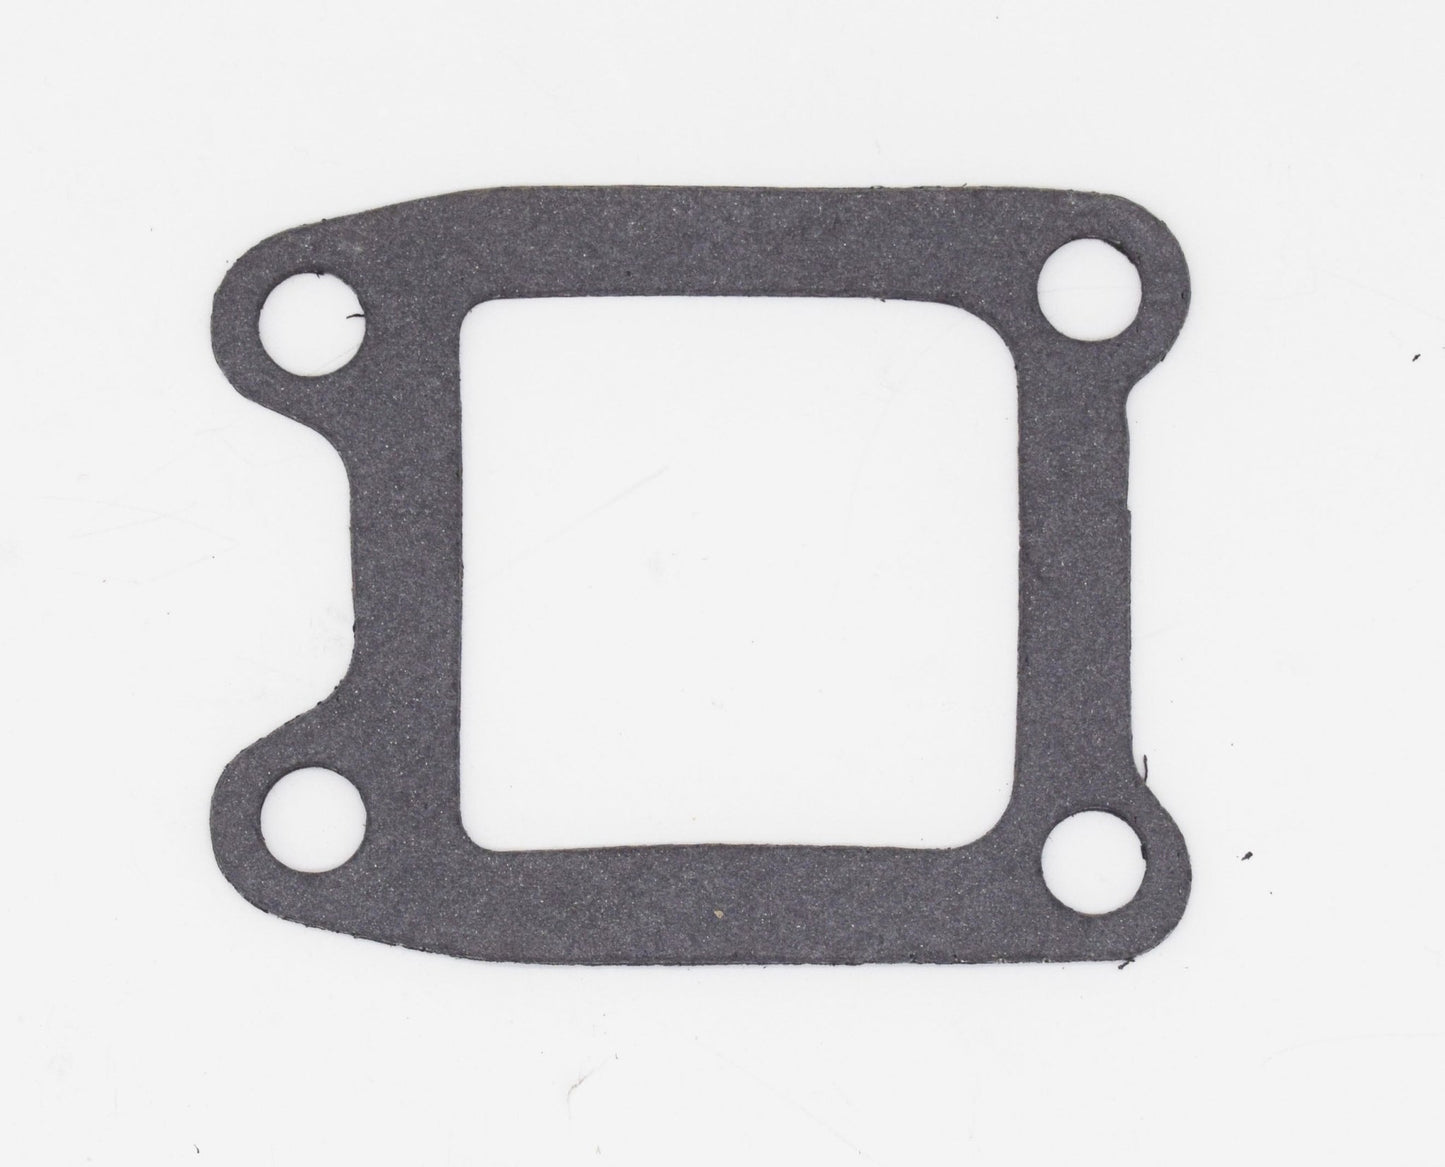 Inlet to Exhaust Gasket, L Head 6-161 Engine, 50-55, Willys Jeepster and Station Wagon - The JeepsterMan